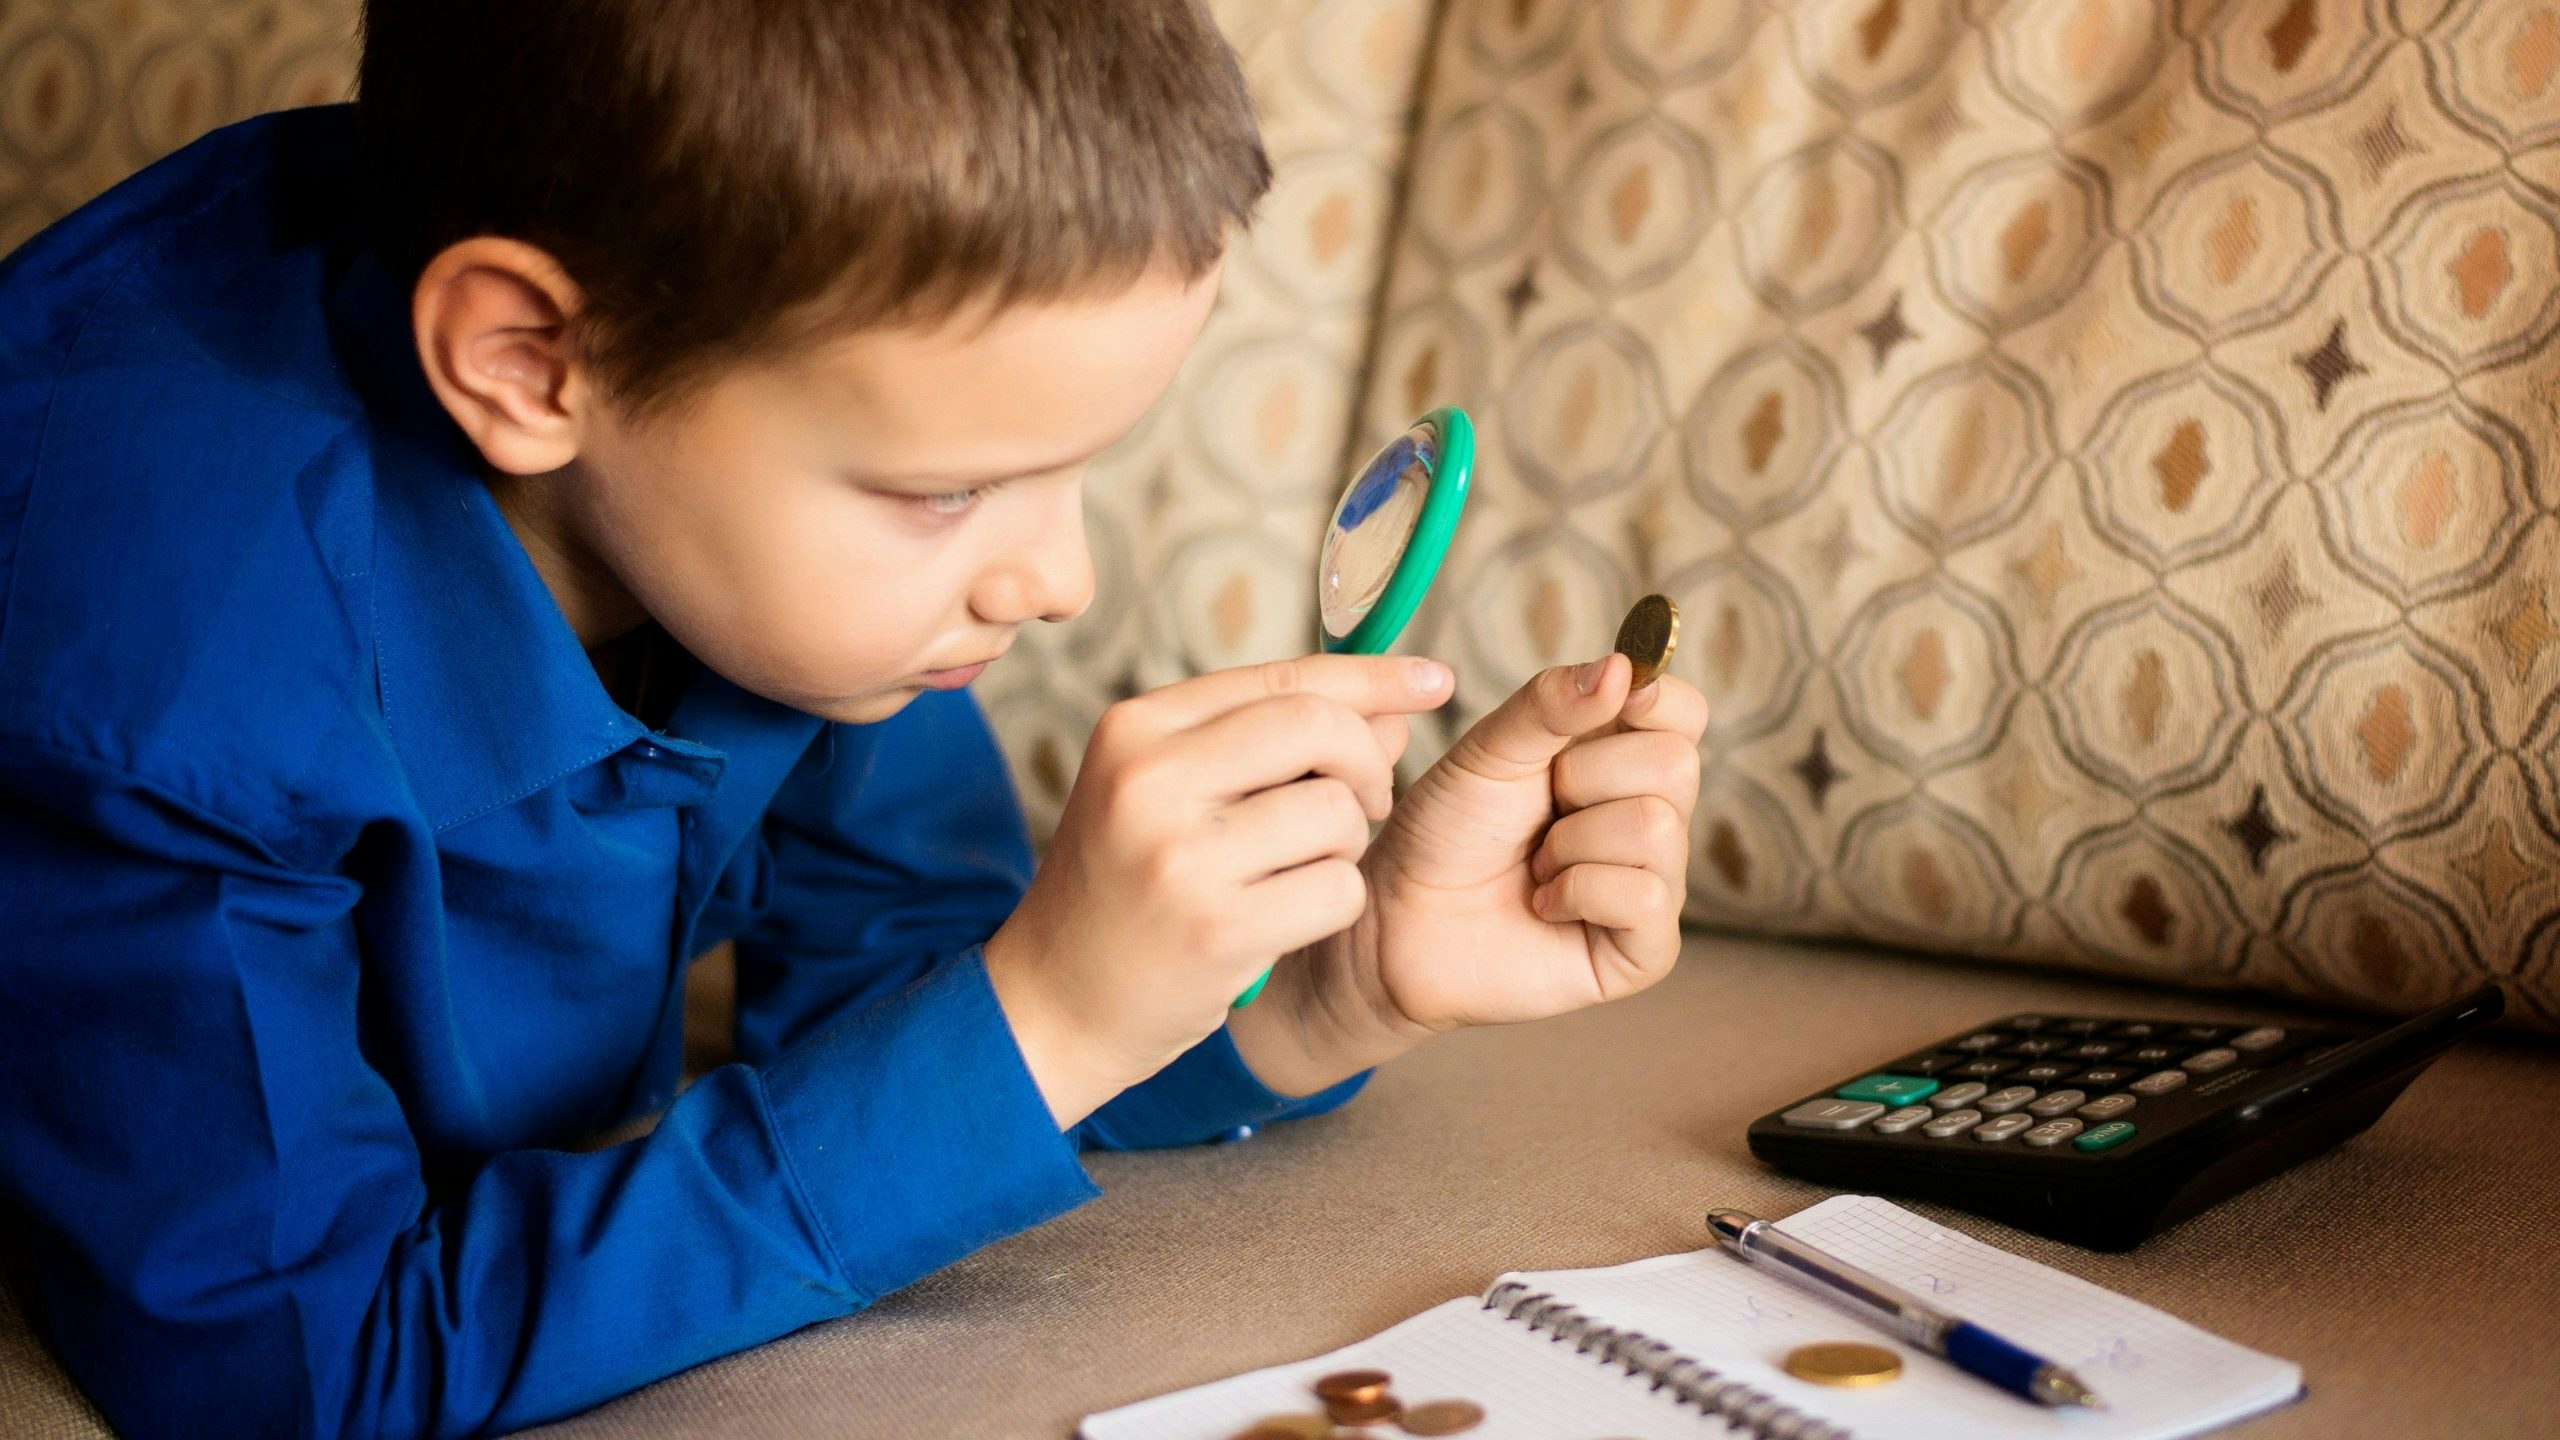 Student using magnifying glass